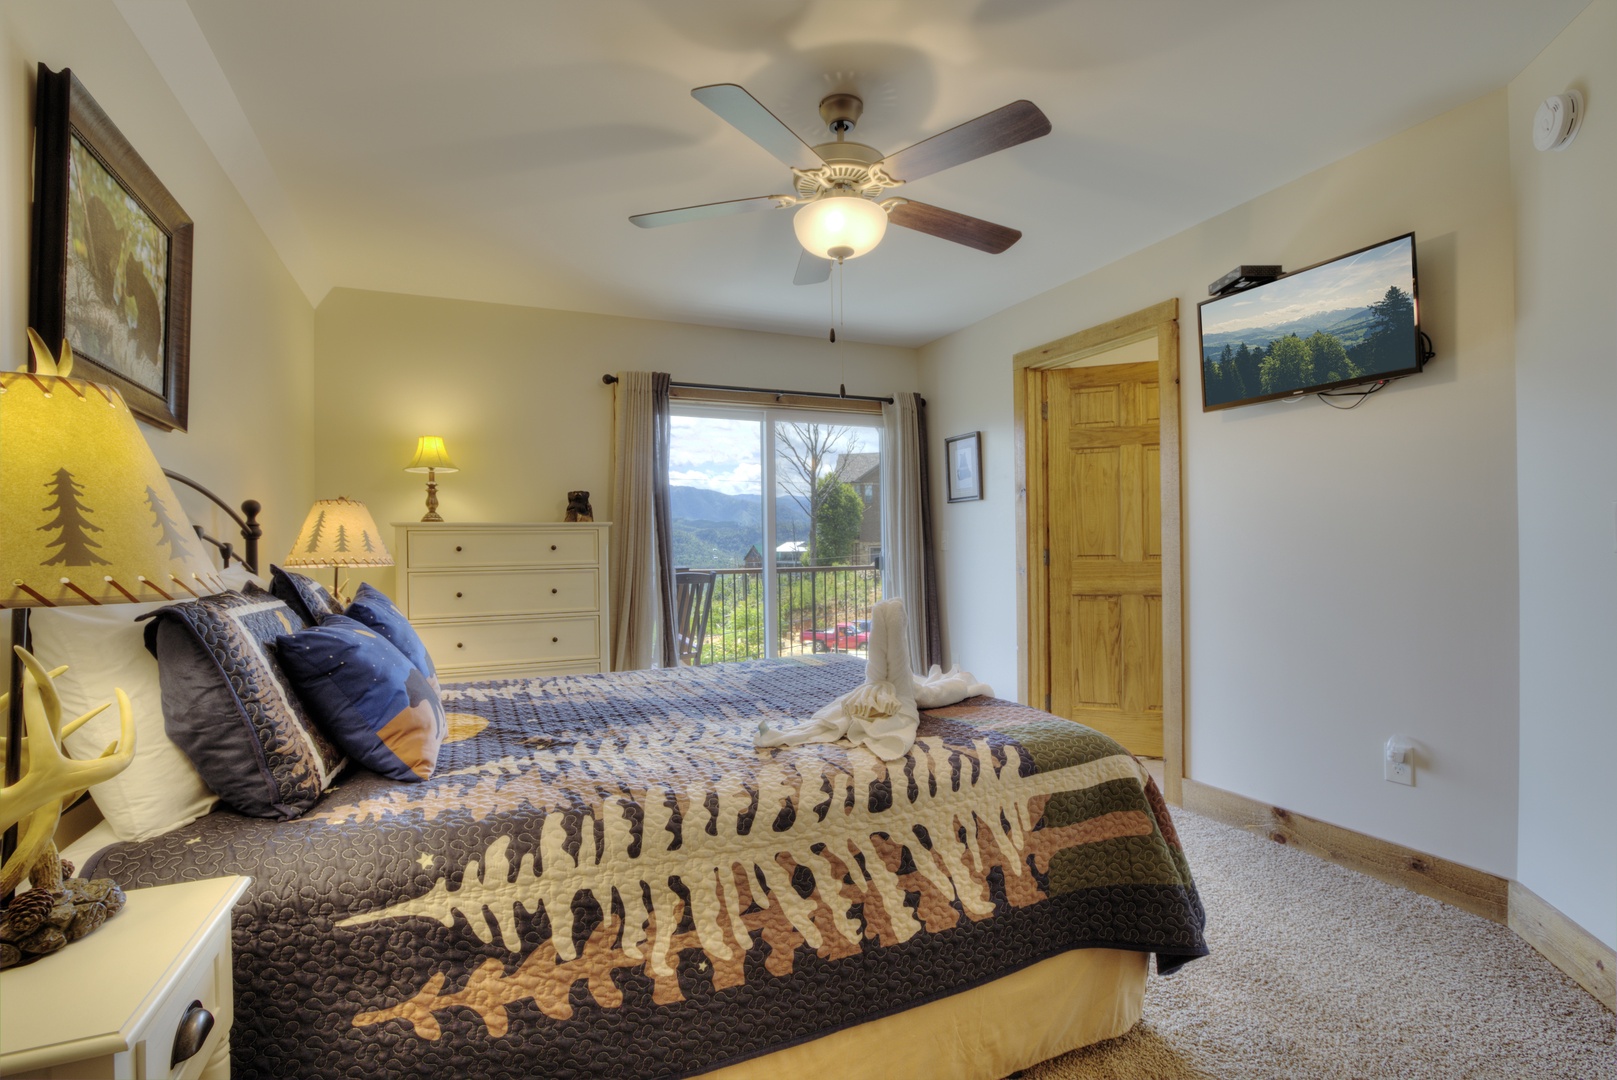 Bedroom with deck entry at The Best View Lodge, a 5 bedroom cabin rental located in gatlinburg